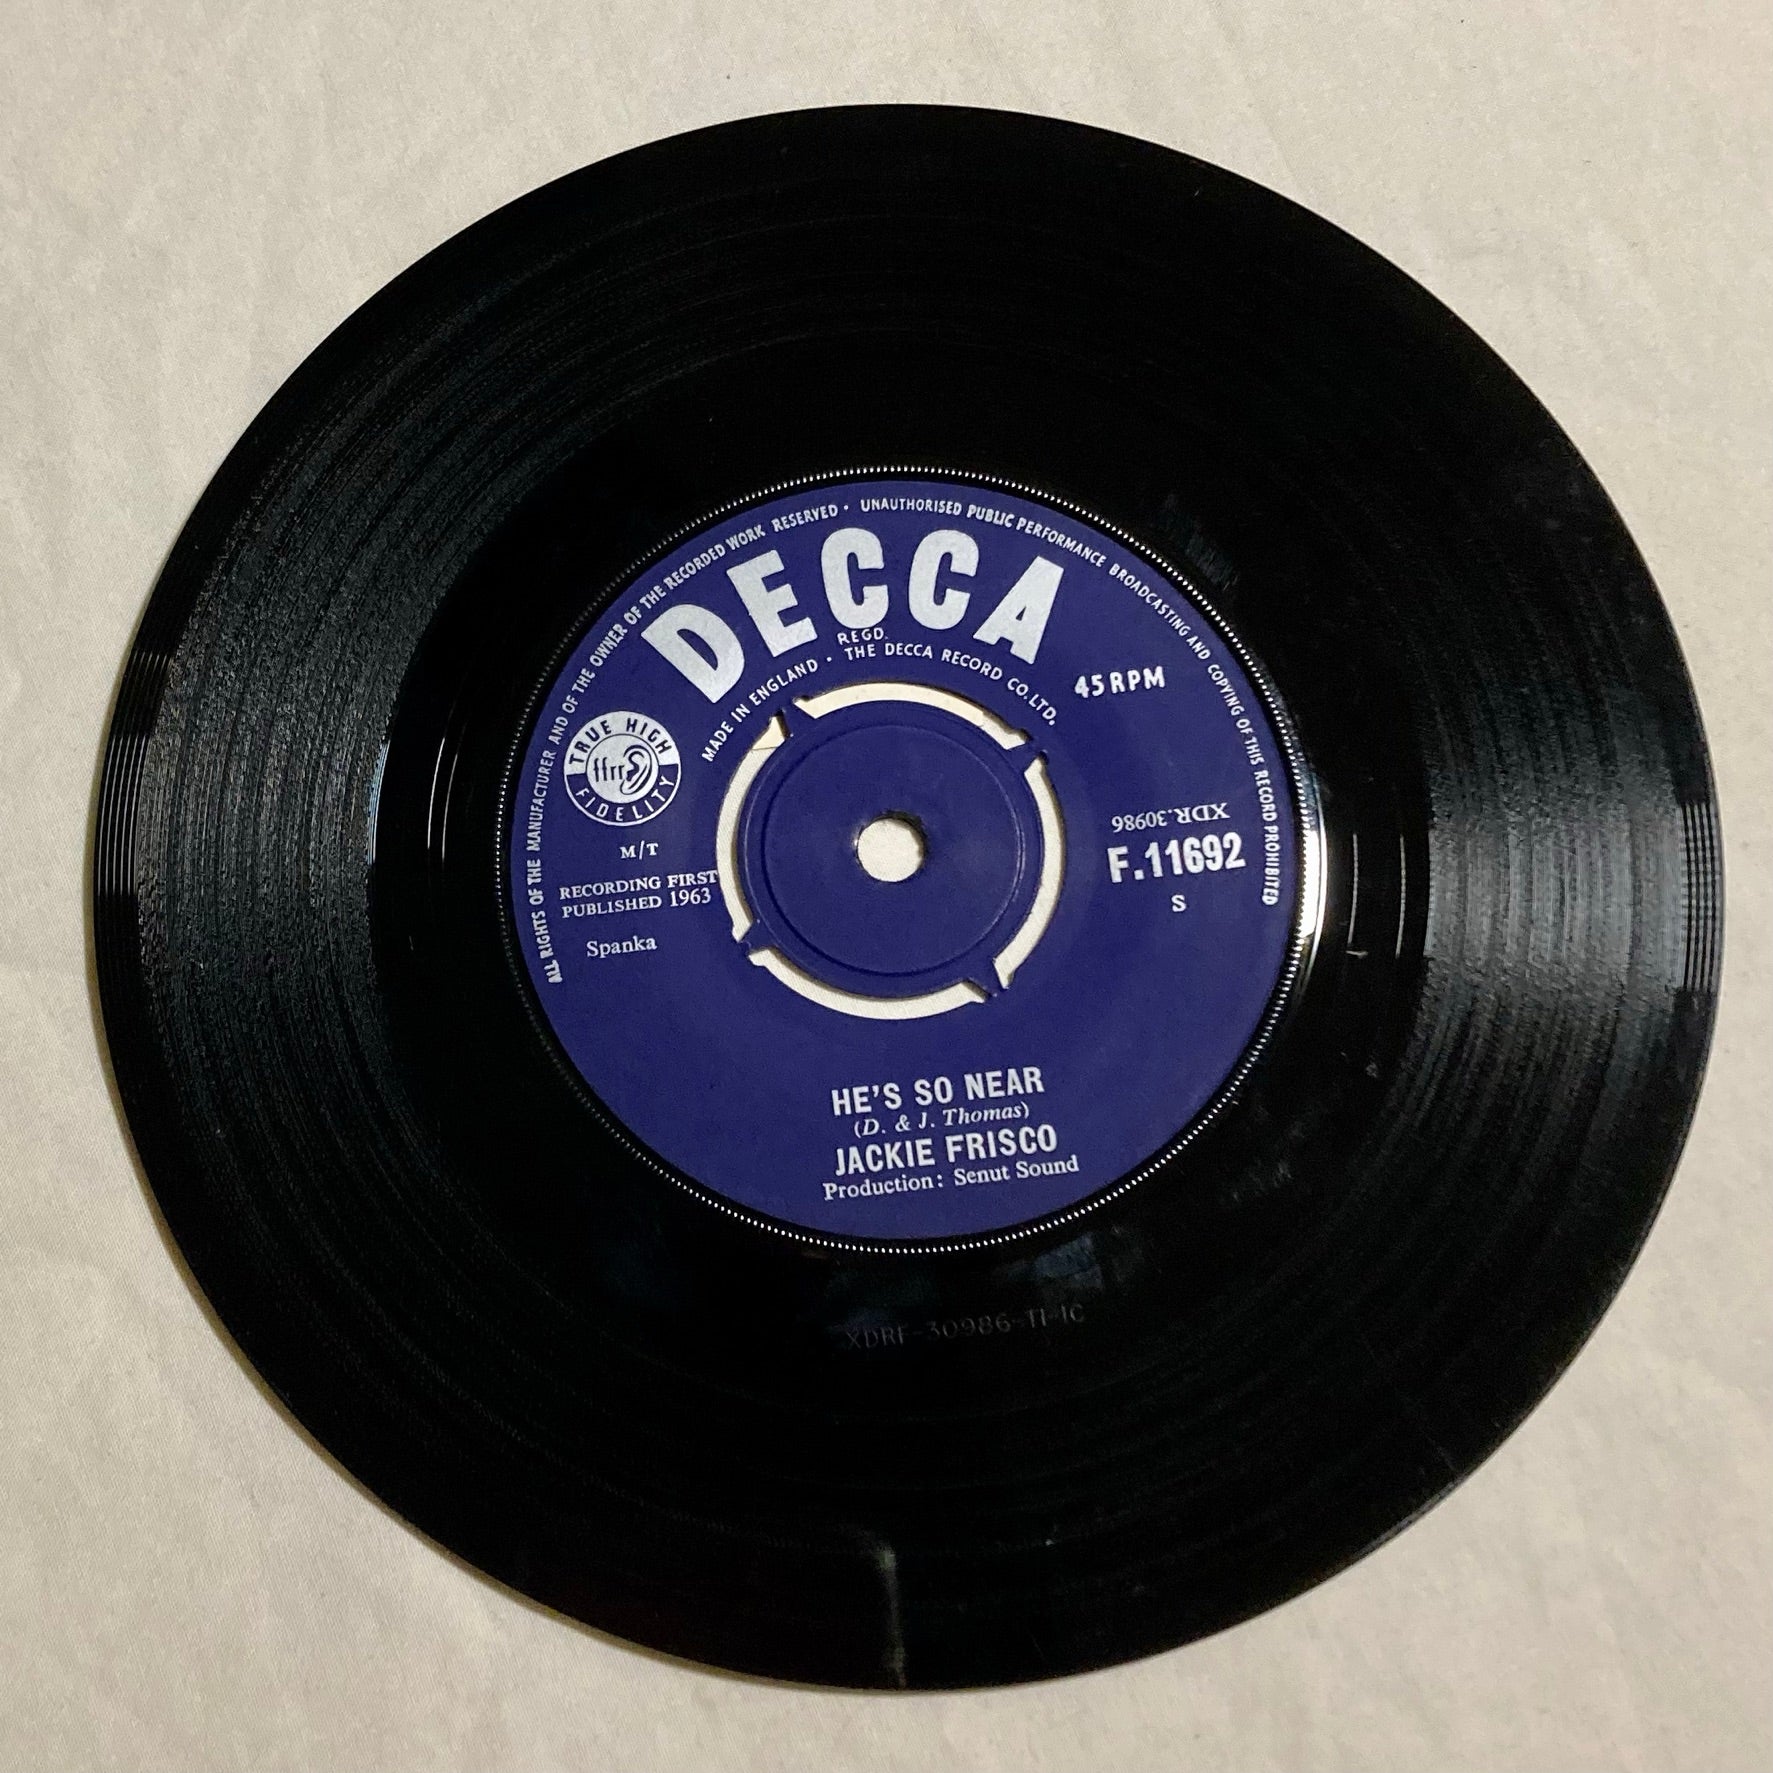 Jackie Frisco - When You Ask About Love / He's So Near 7" single